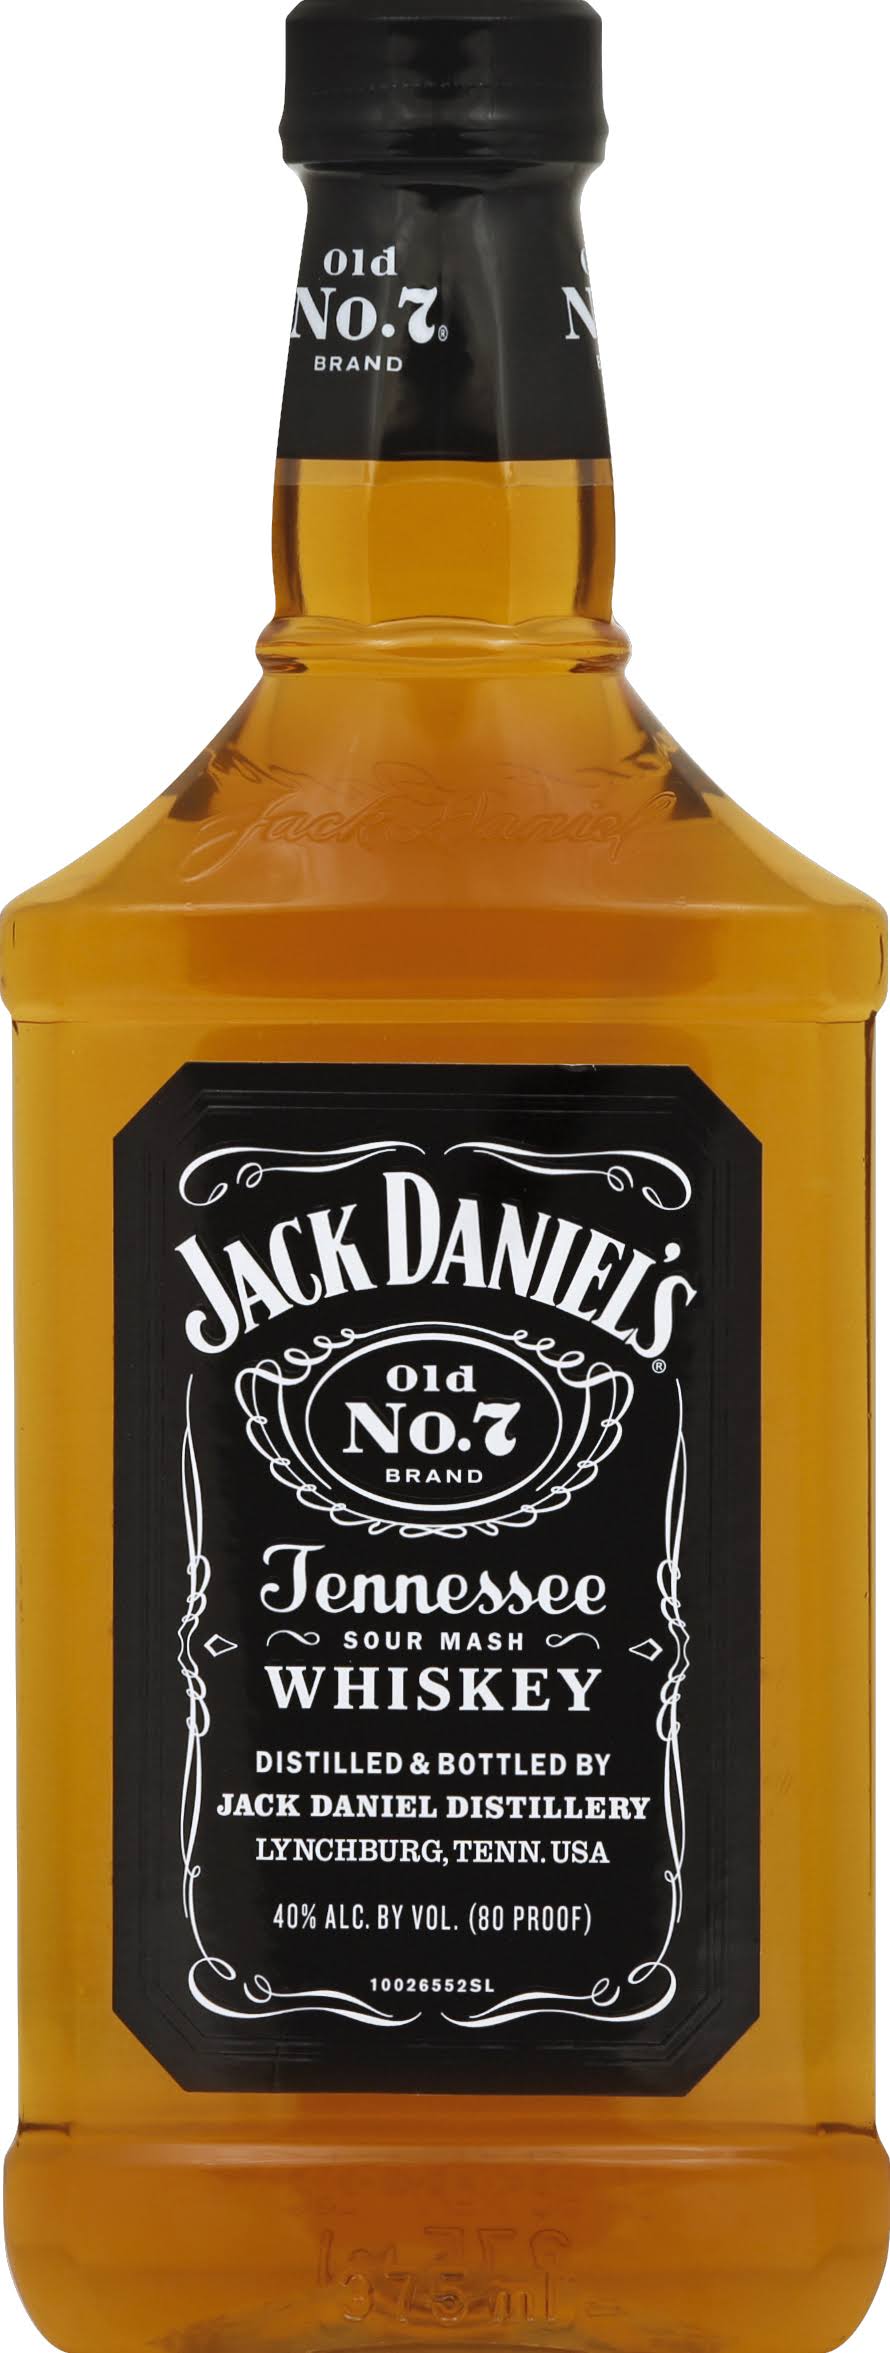 Jack Daniels Old No. 7 Whiskey, Tennessee Whiskey - 375 ml